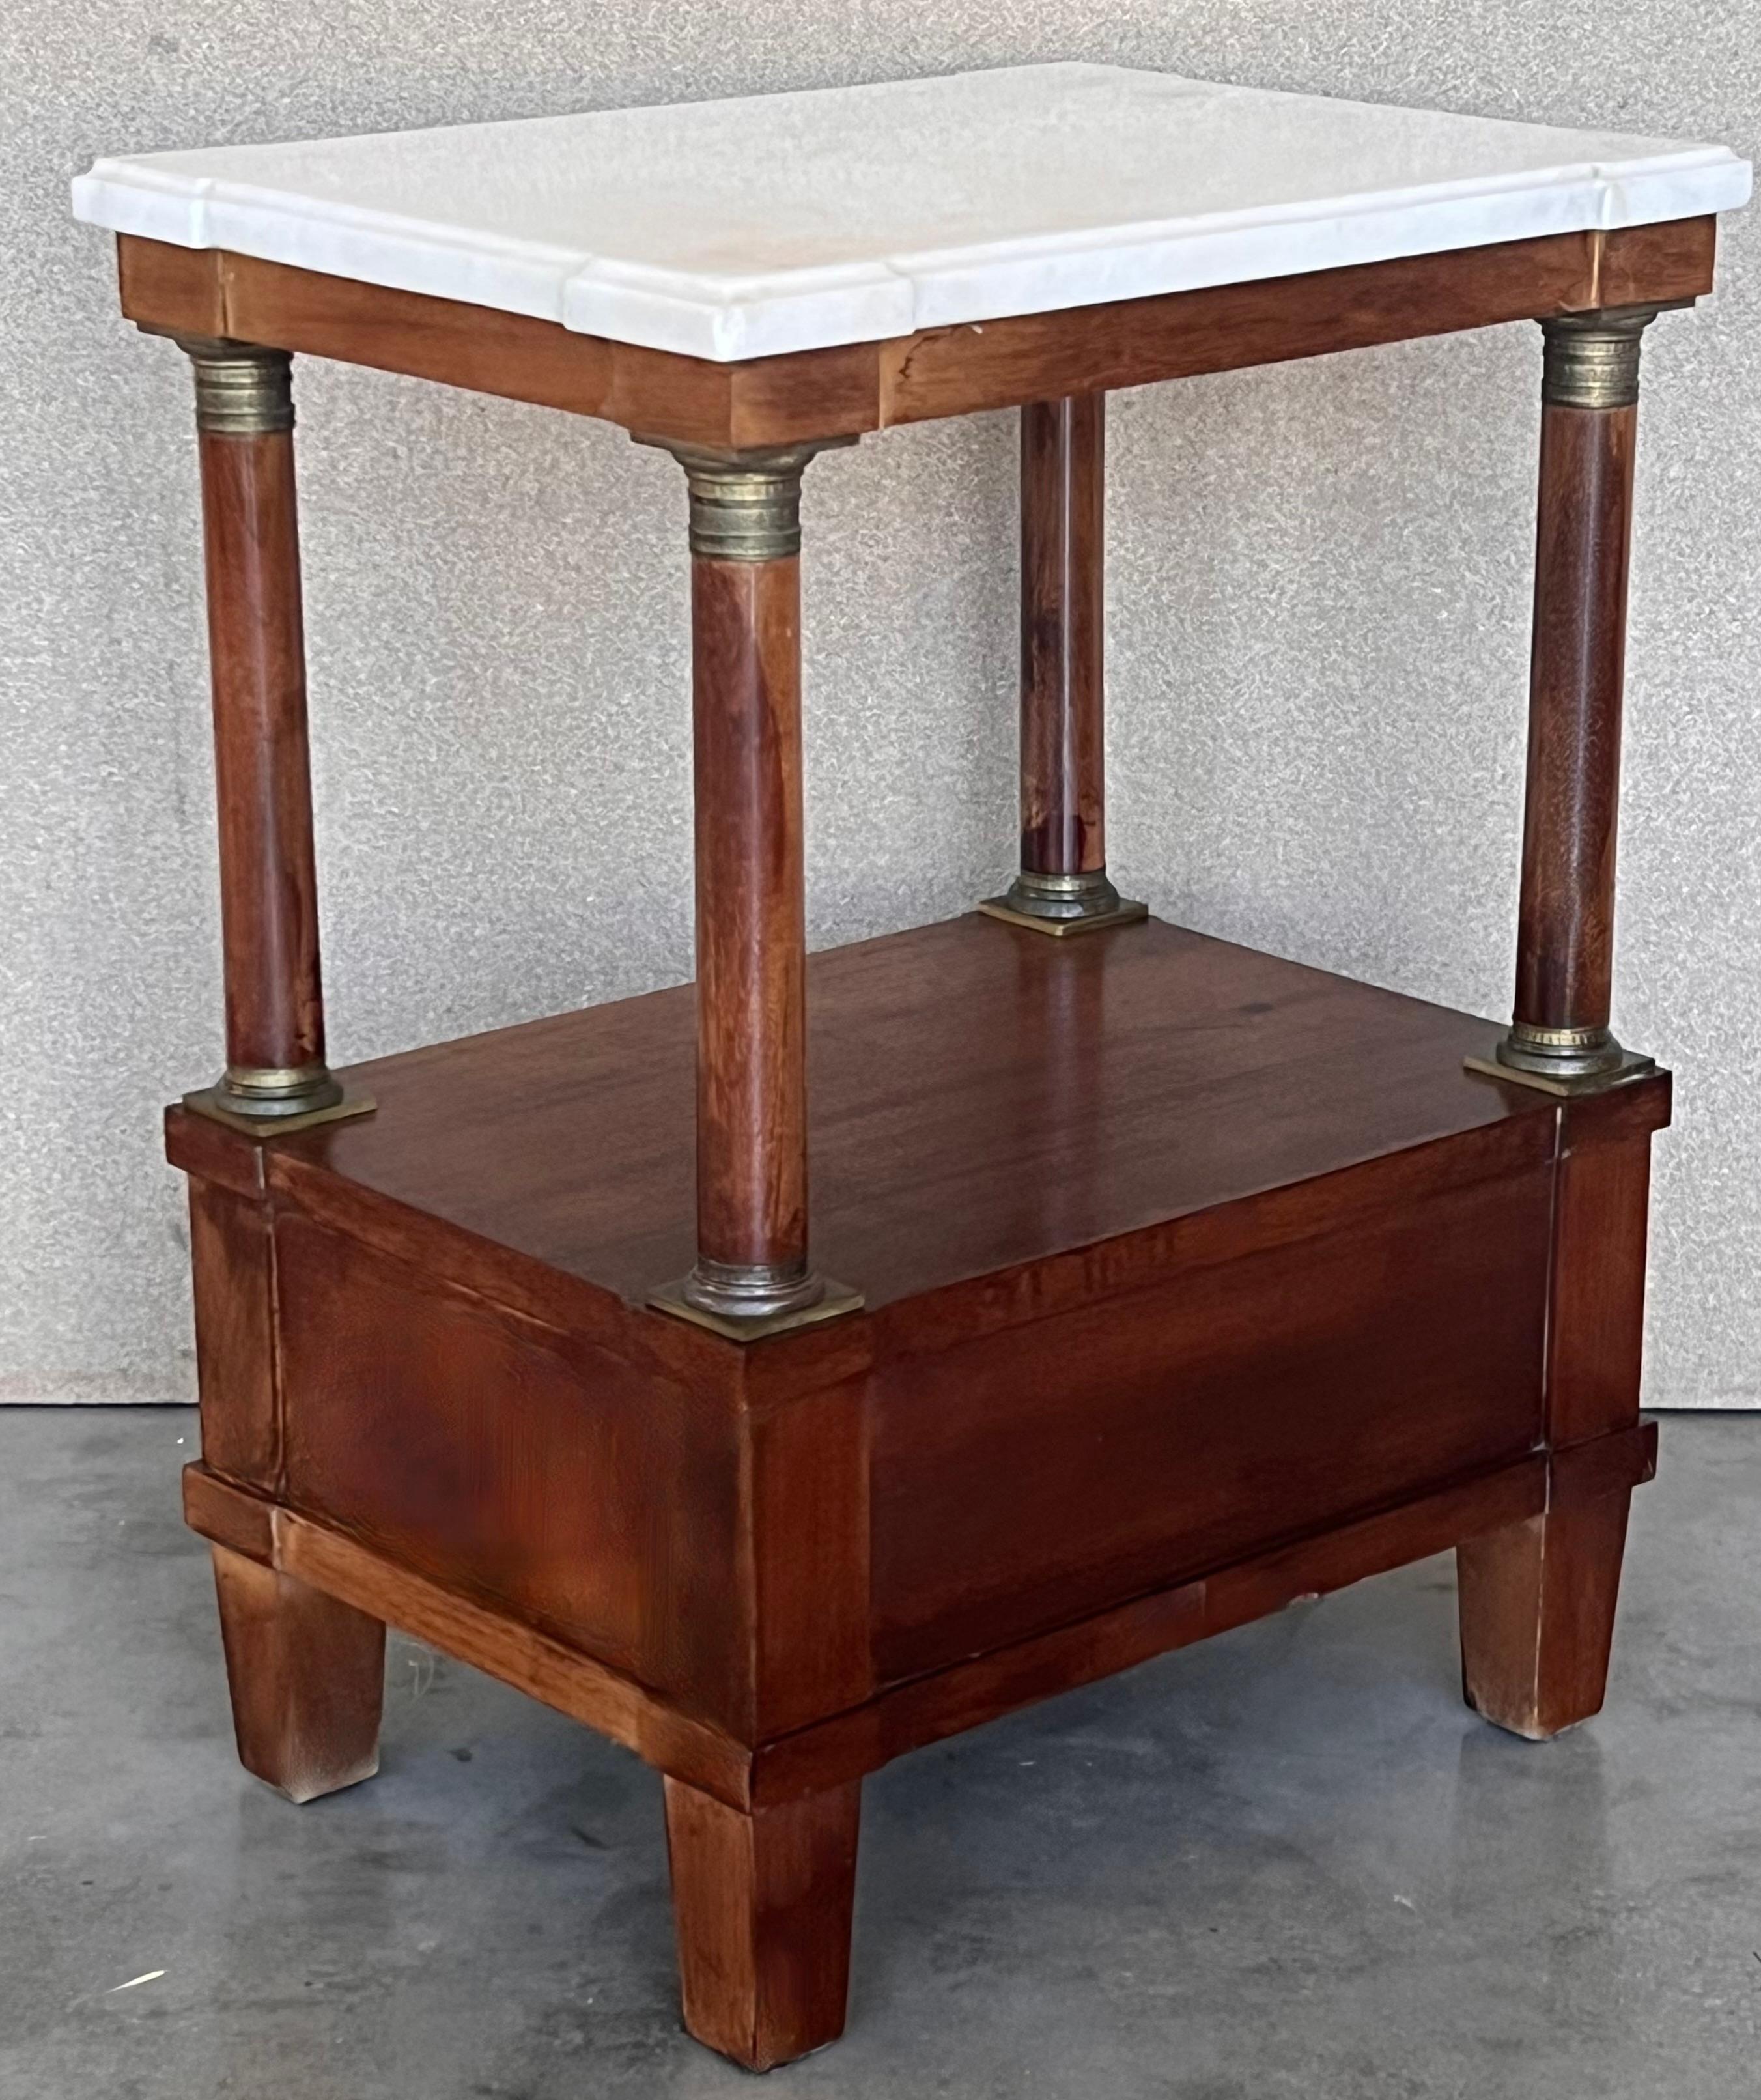 Pair of Empire Style Marble-Top Nightstands with shelve and low drawer For Sale 1